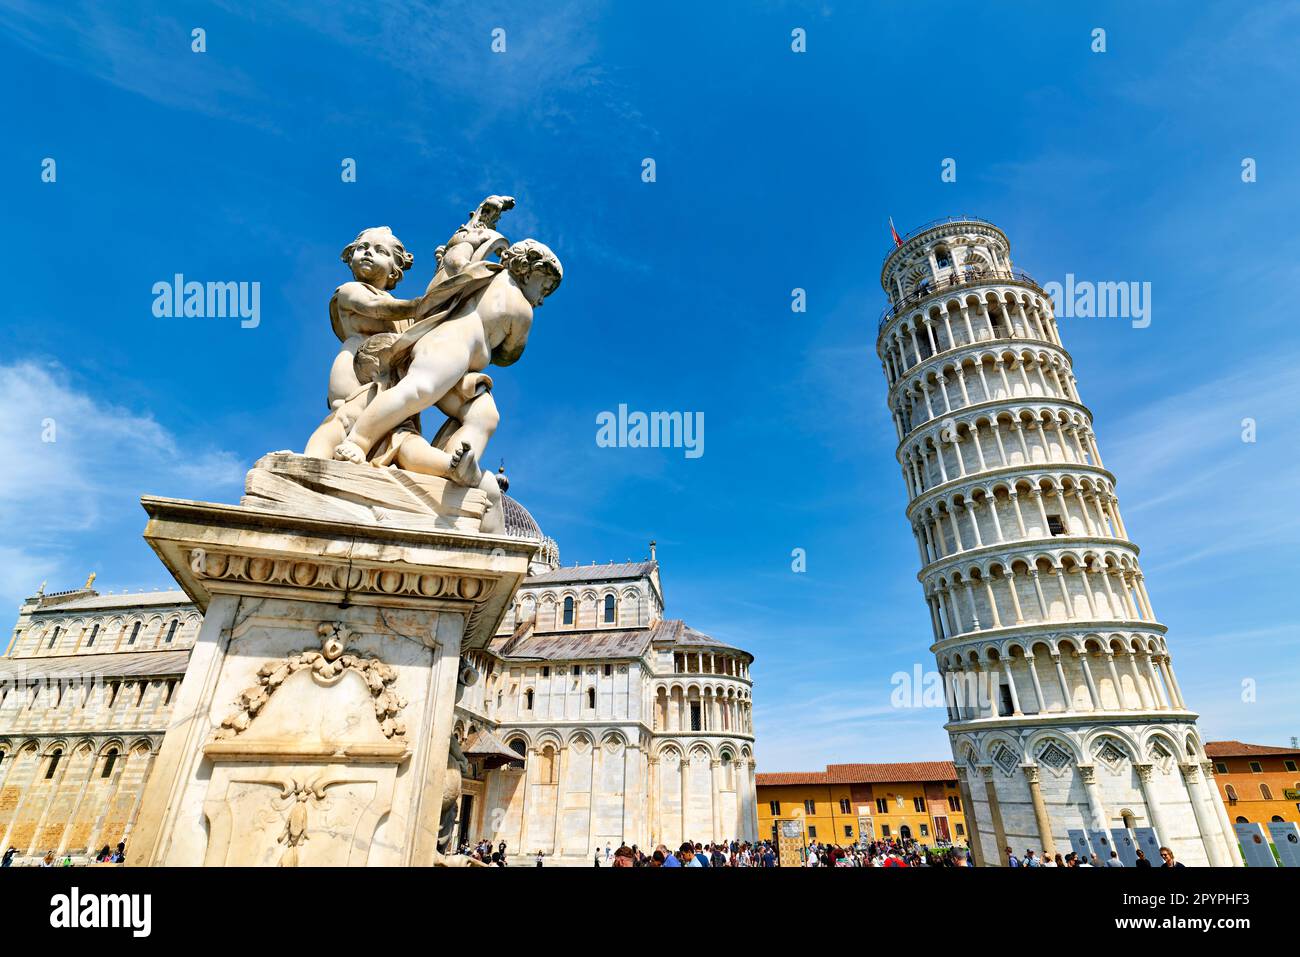 Pisa Tuscany Italy. Piazza dei Miracoli (Square of Miracles). The Leaning Tower and fontana dei putti (fountain of the angels) Stock Photo